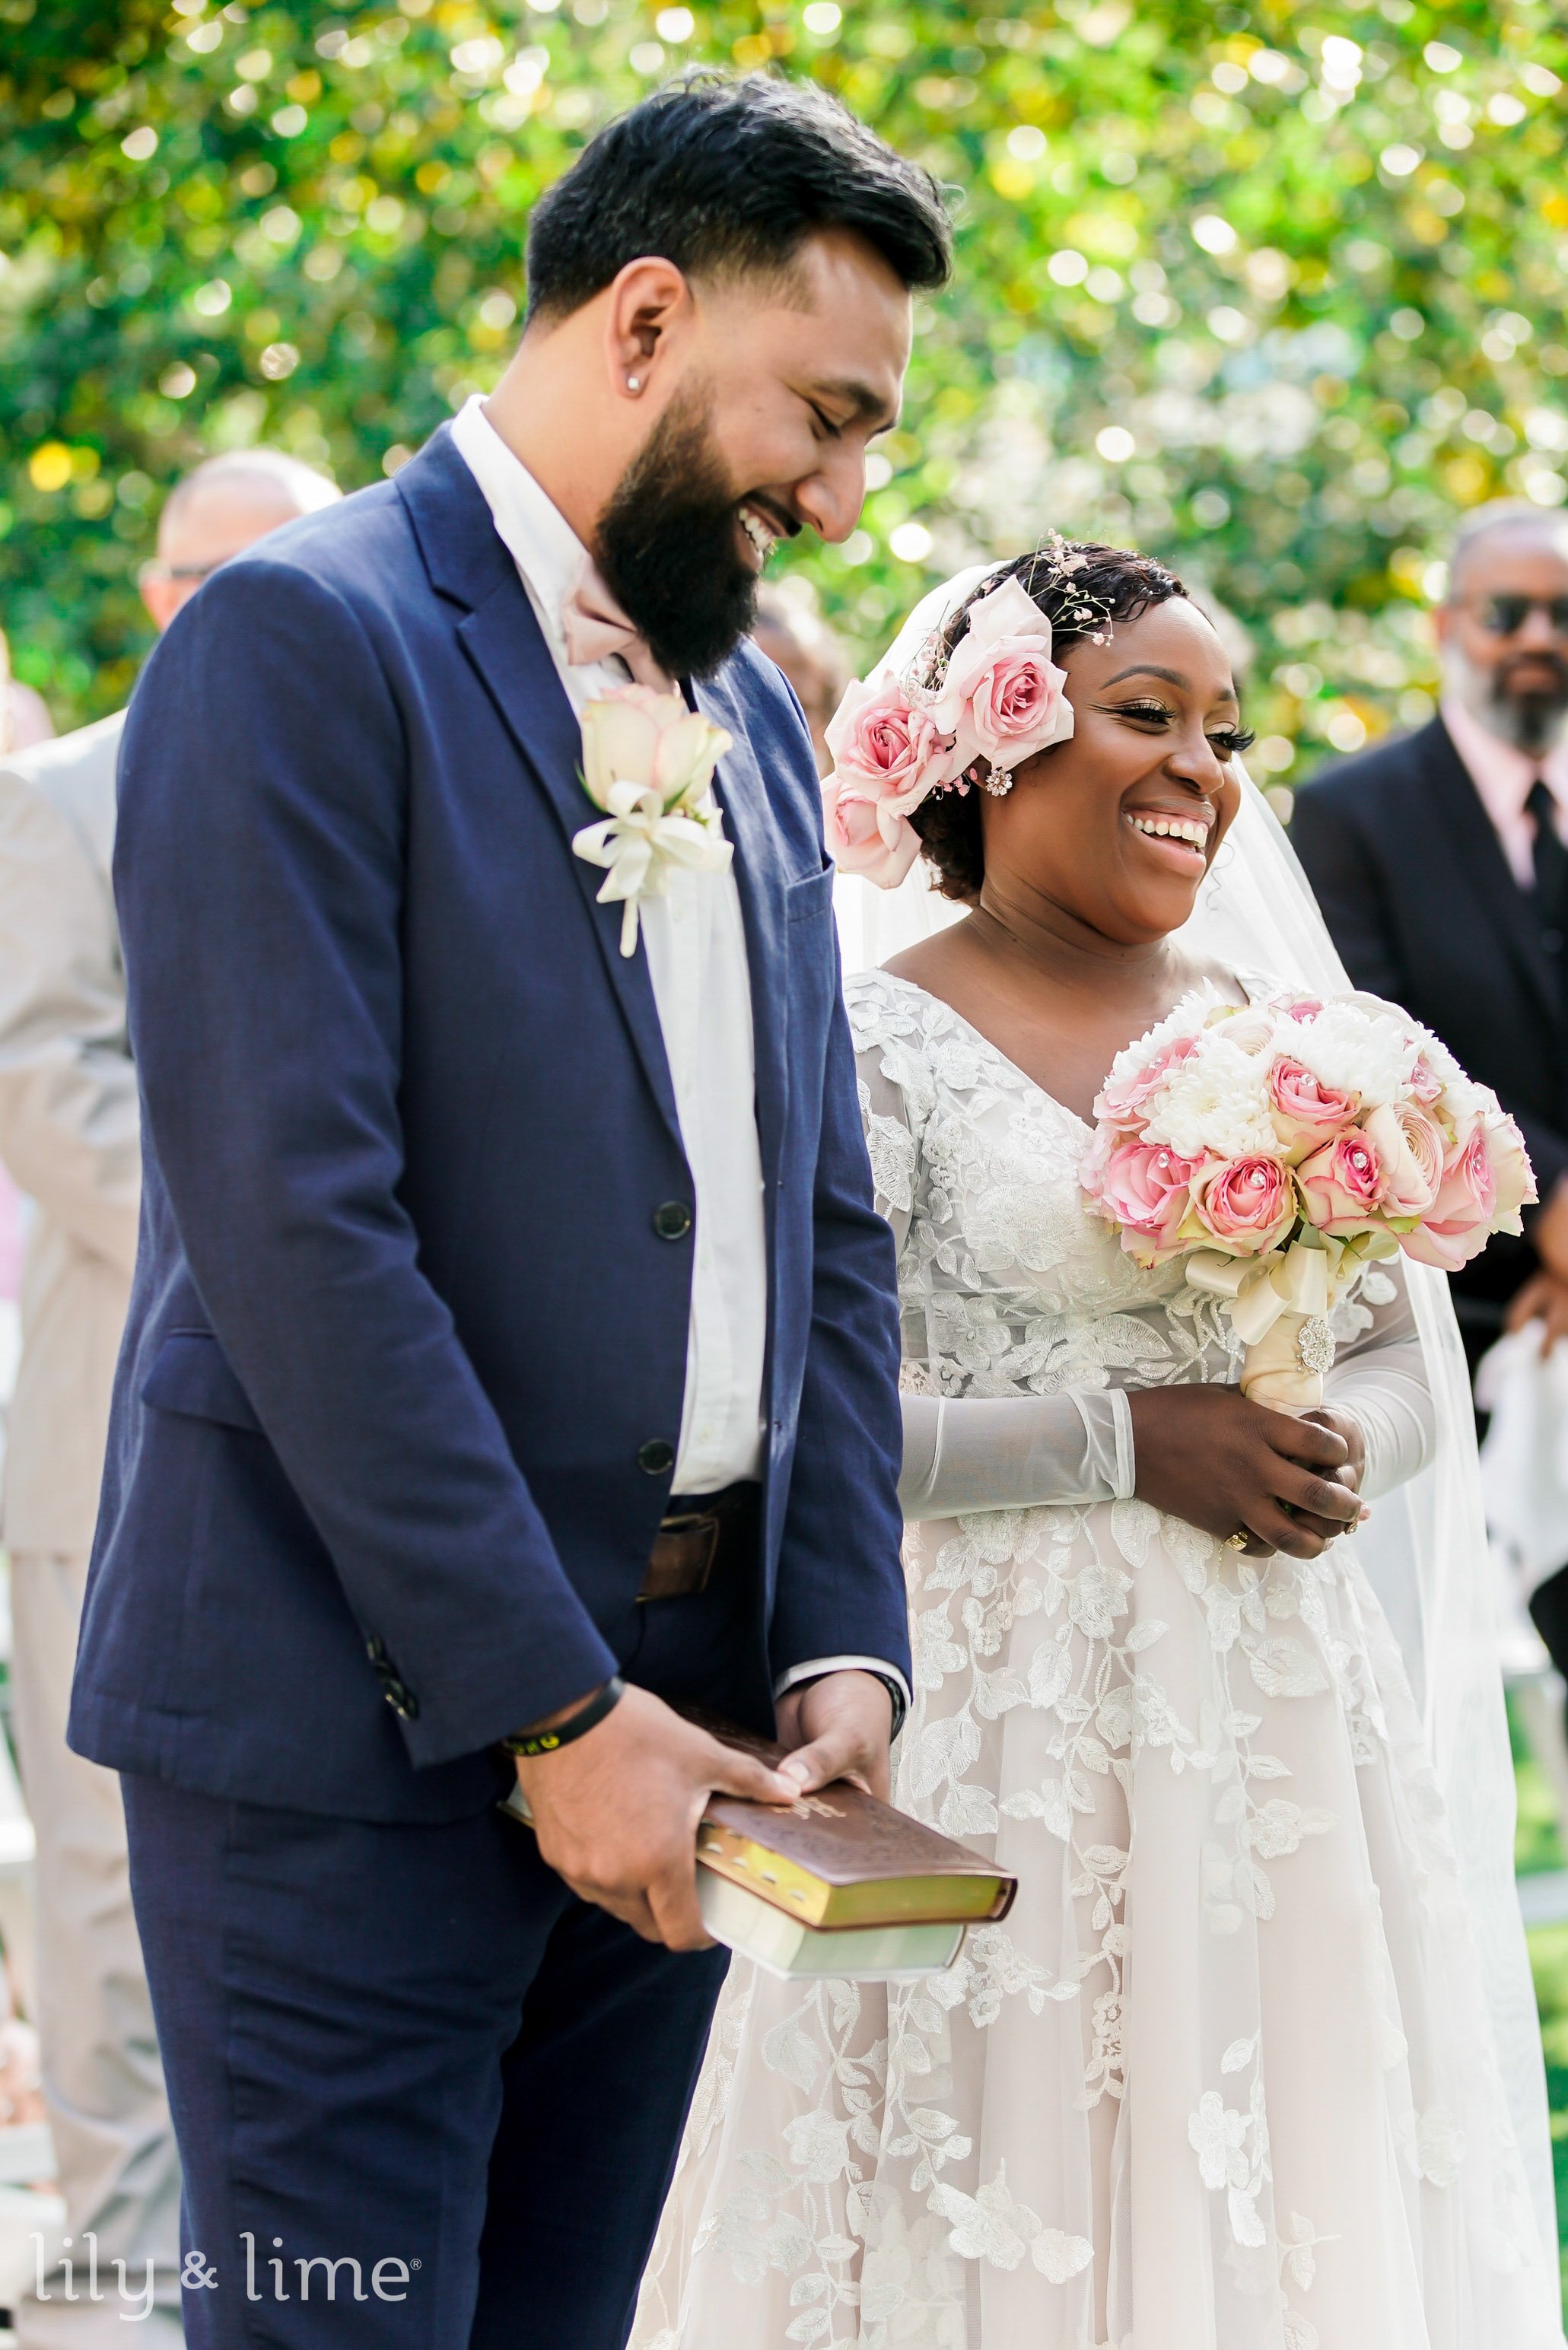 Black Wedding Traditions You May Not Know About BridalGuide